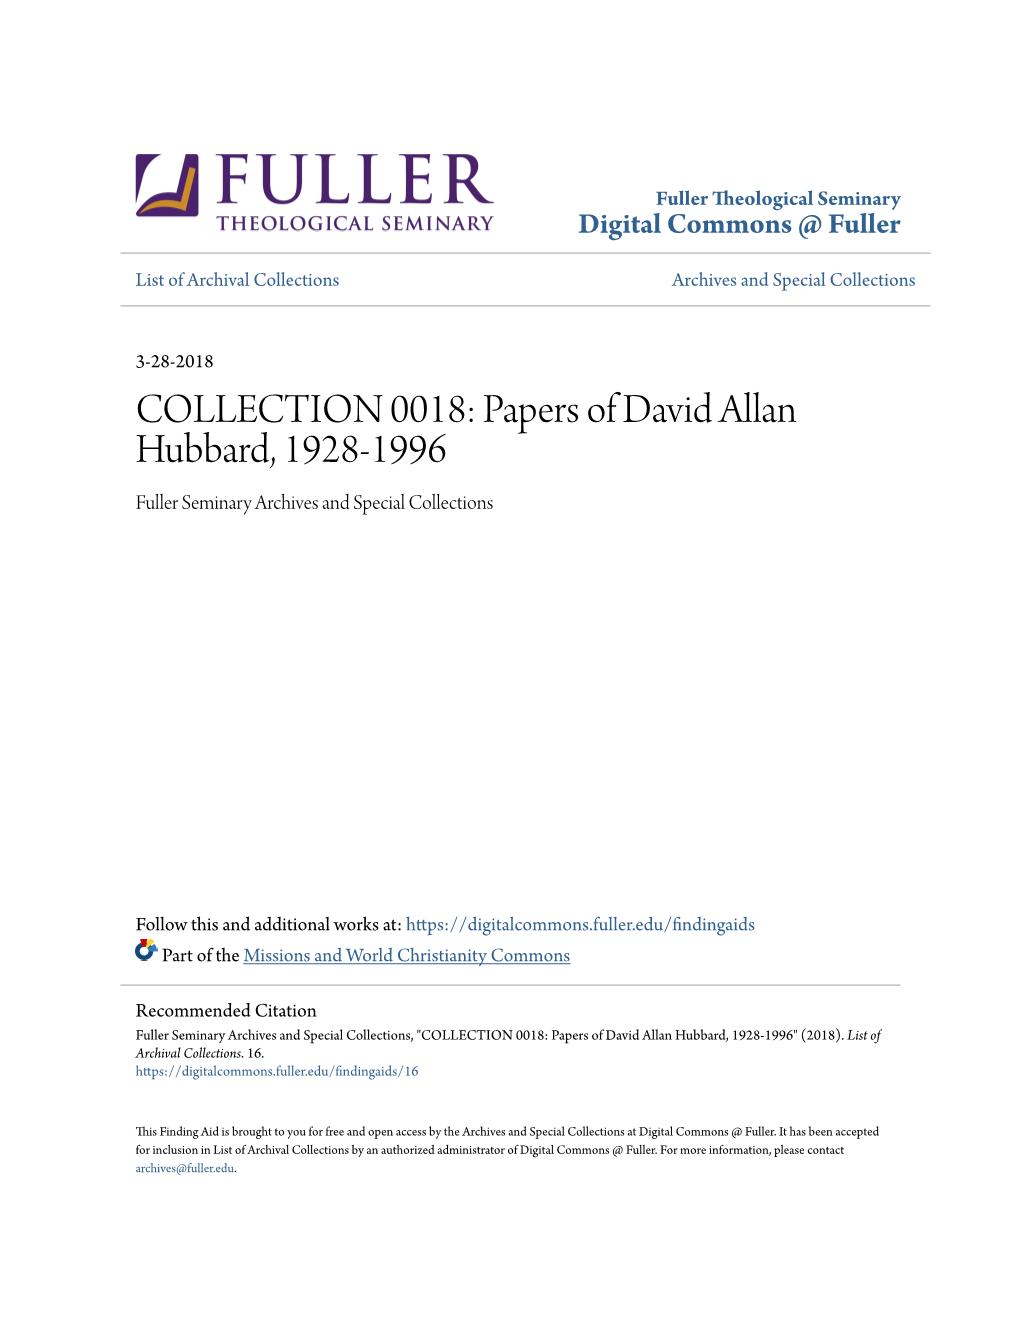 Papers of David Allan Hubbard, 1928-1996 Fuller Seminary Archives and Special Collections